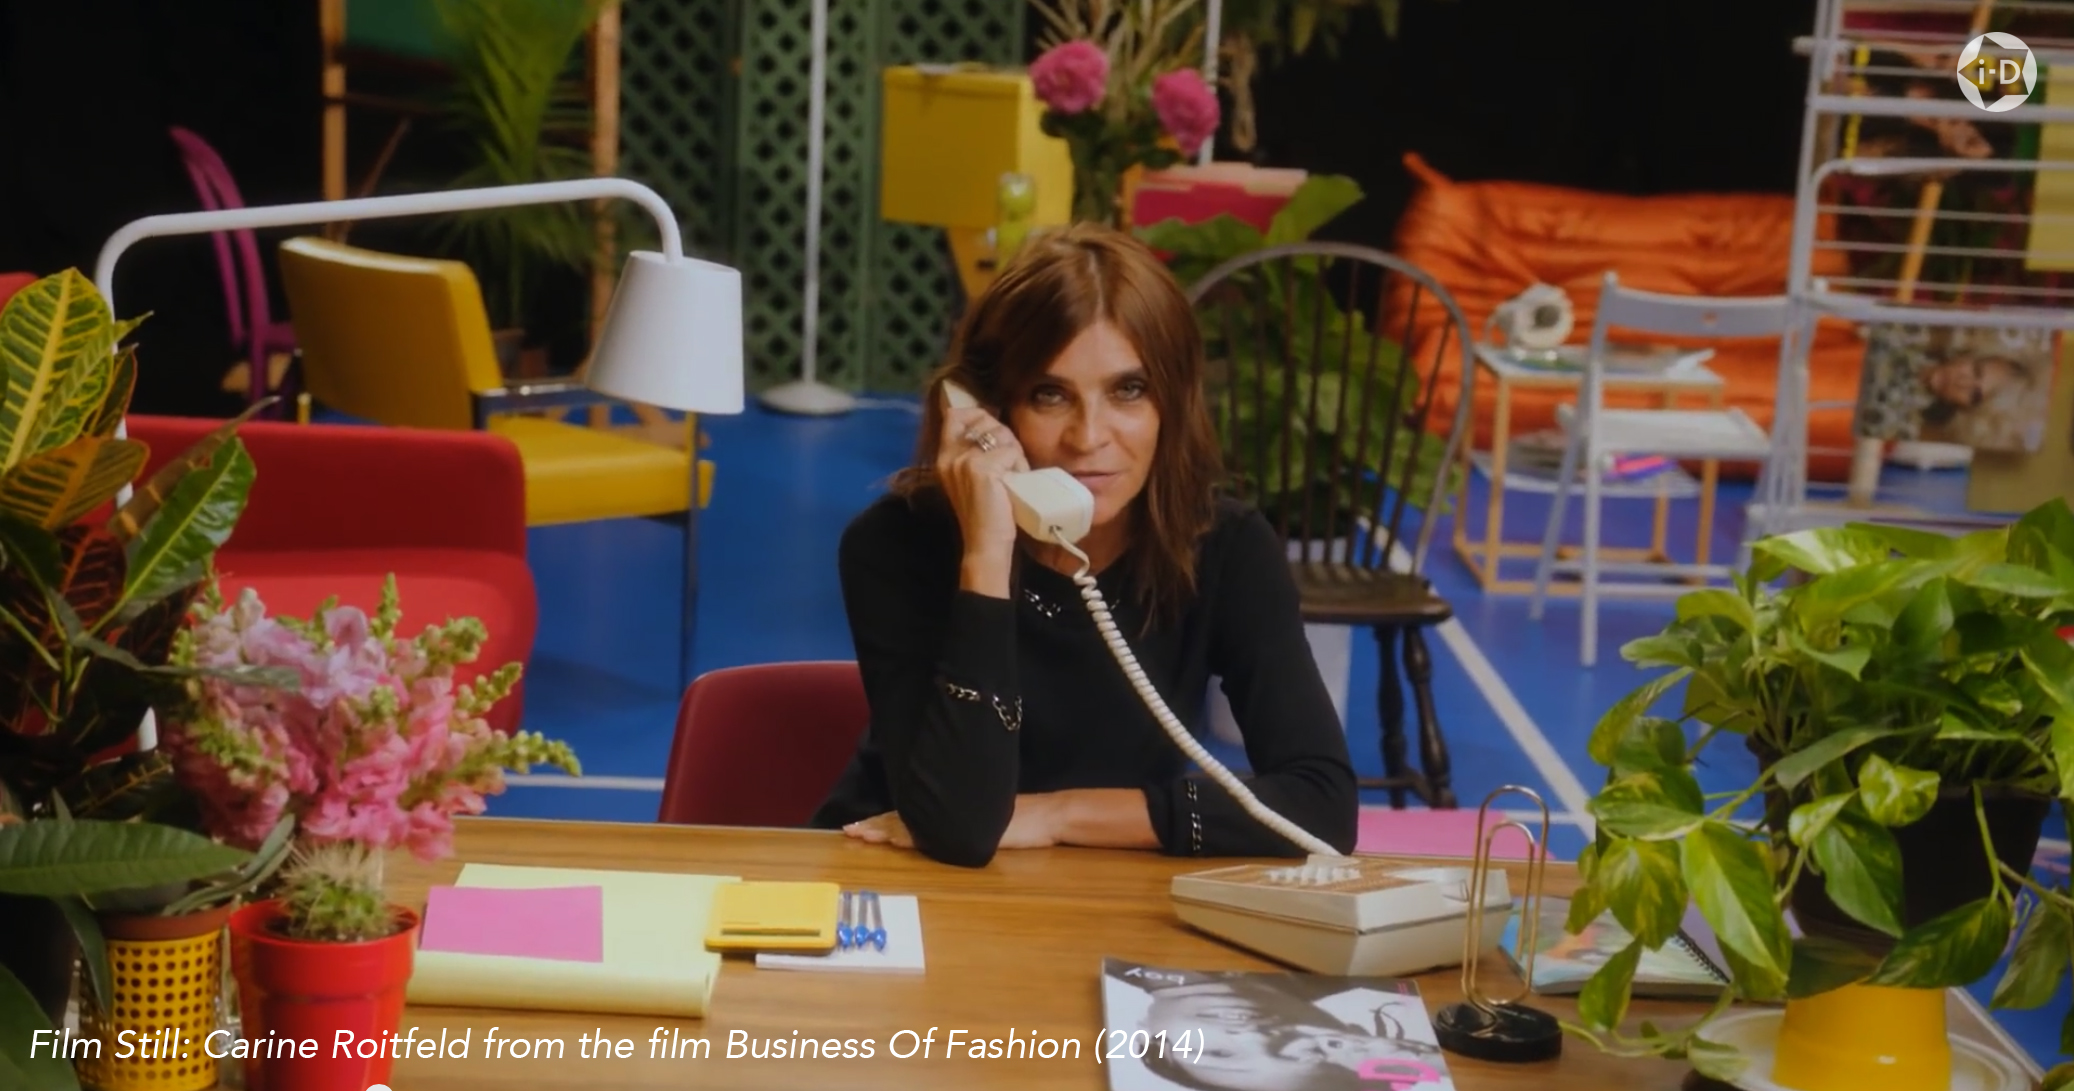 Film Still: Carine Roitfeld from the film Business Of Fashion (2014)